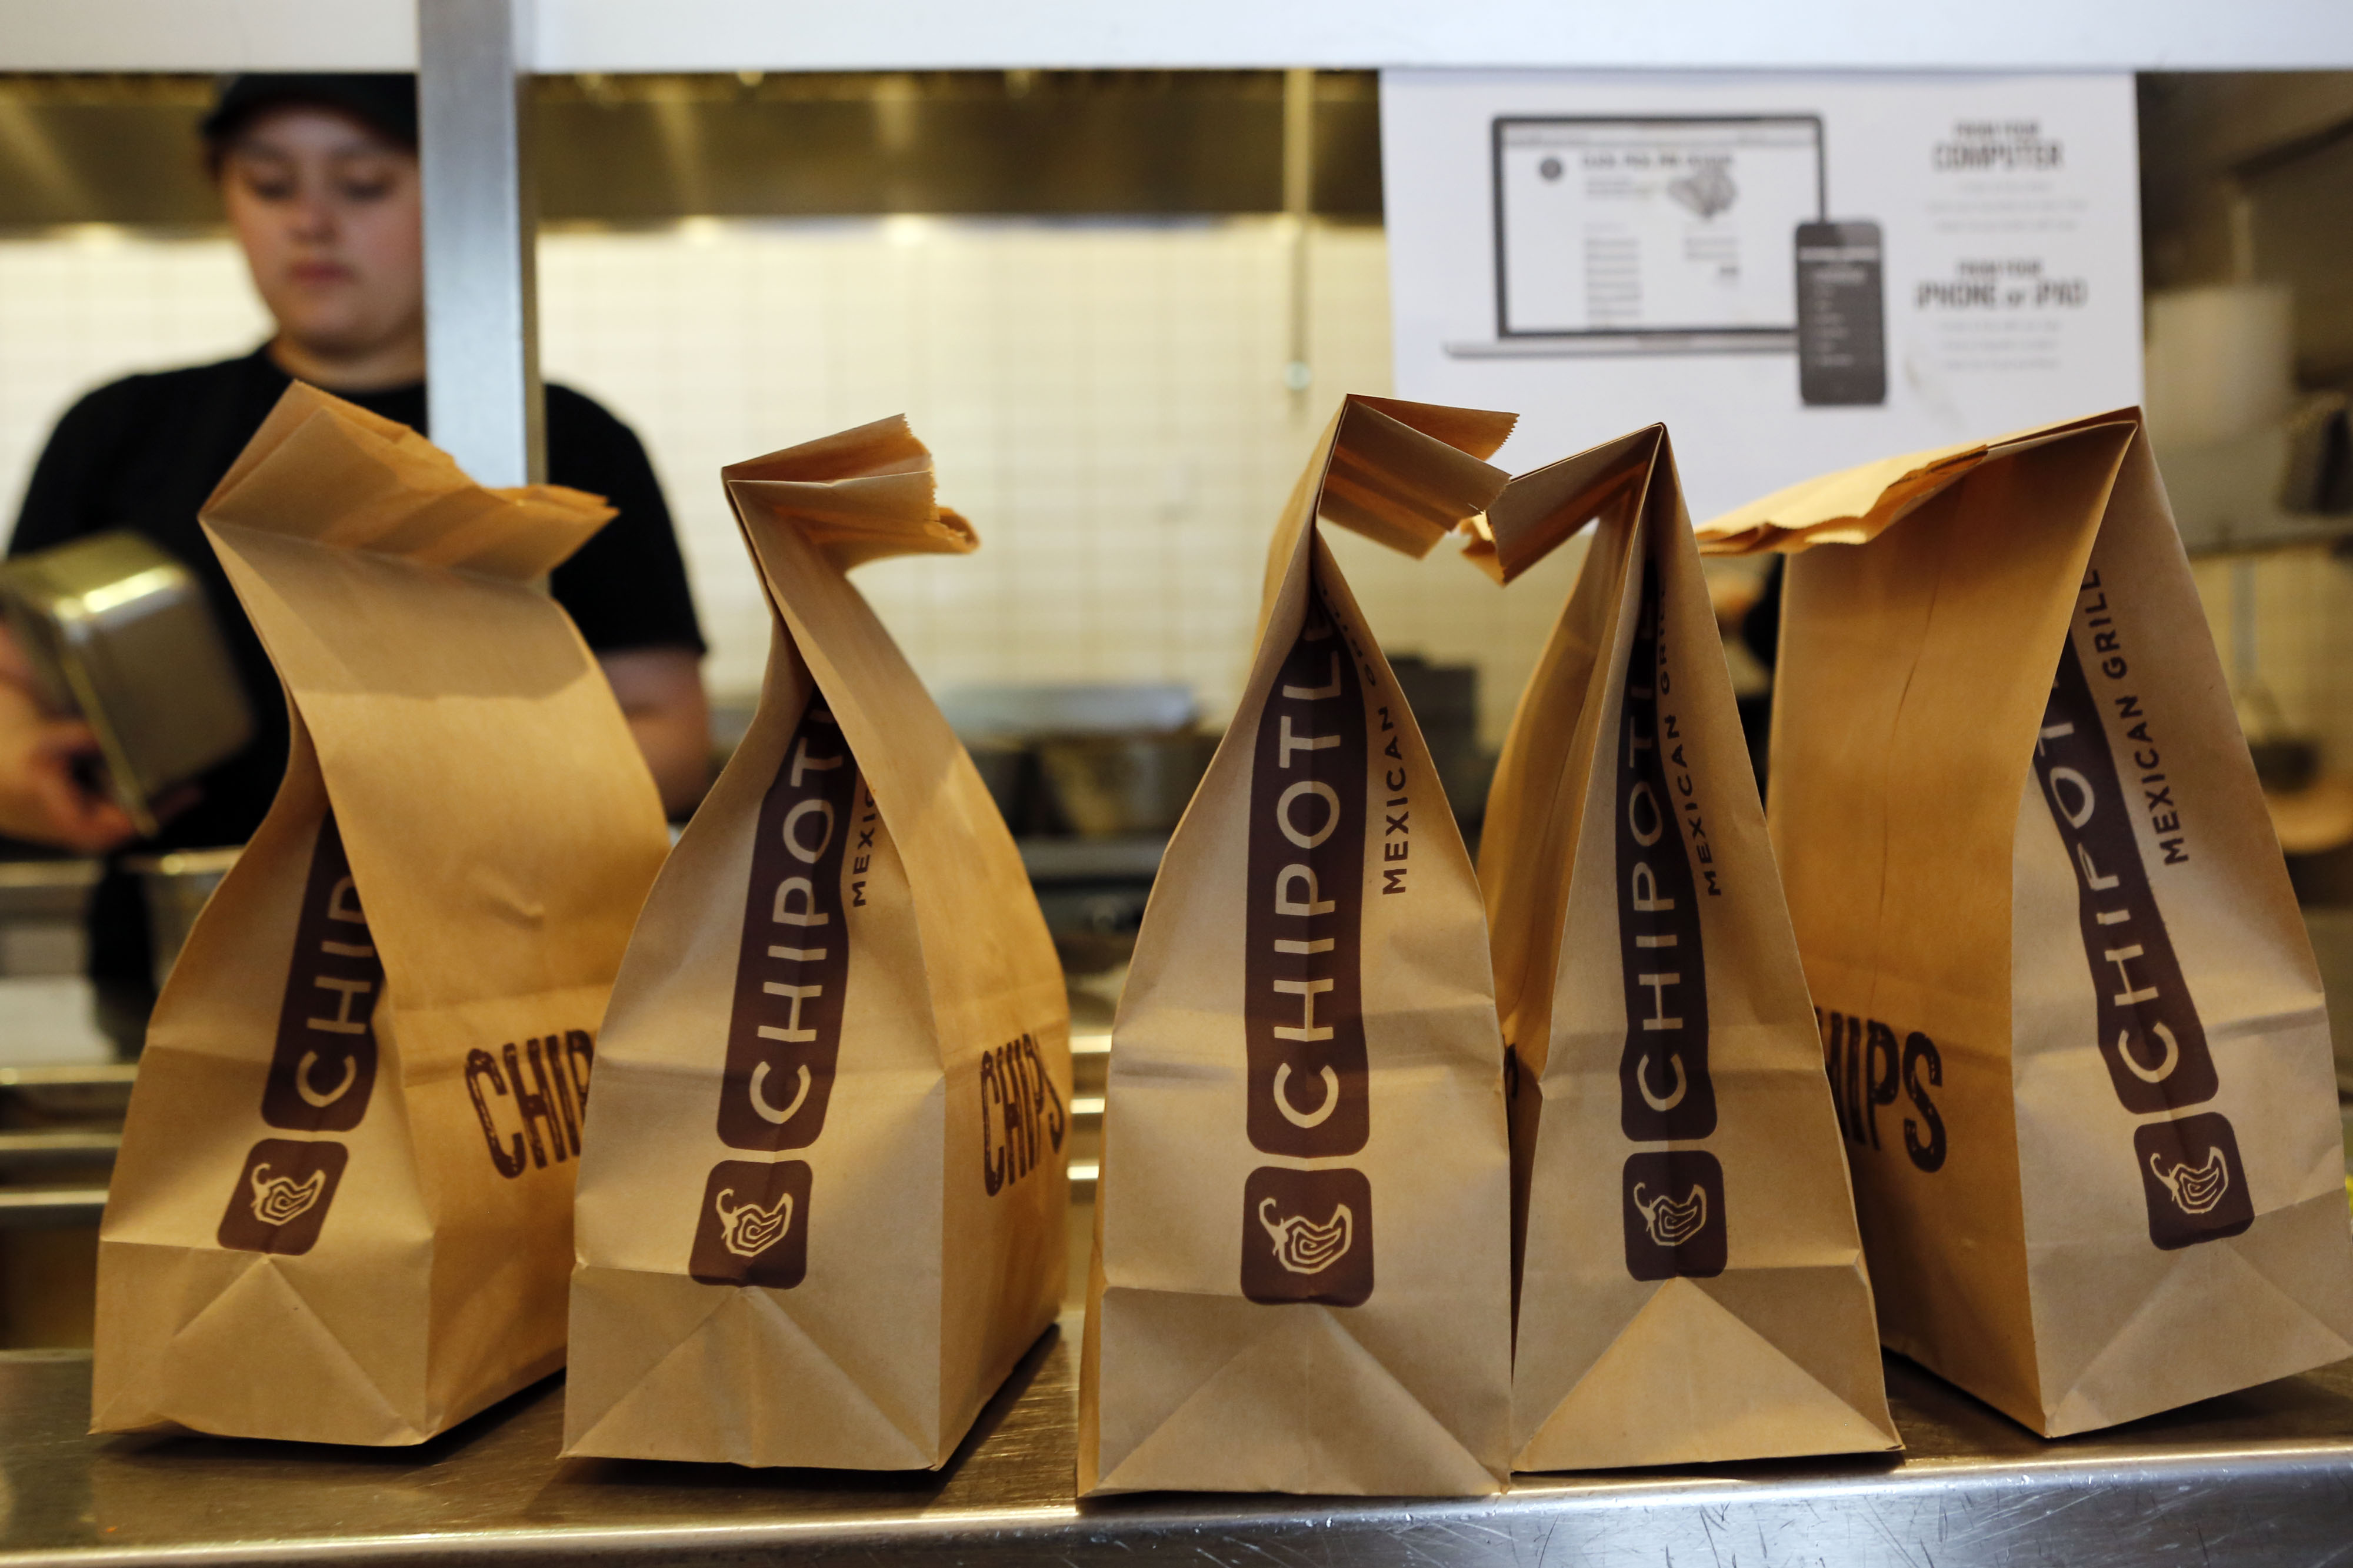 Bags of tortilla chips sit in a row at a Chipotle Mexican Grill Inc. restaurant in Hollywood, California on July 16, 2013. (Patrick T. Fallon—Bloomberg / Getty Images)